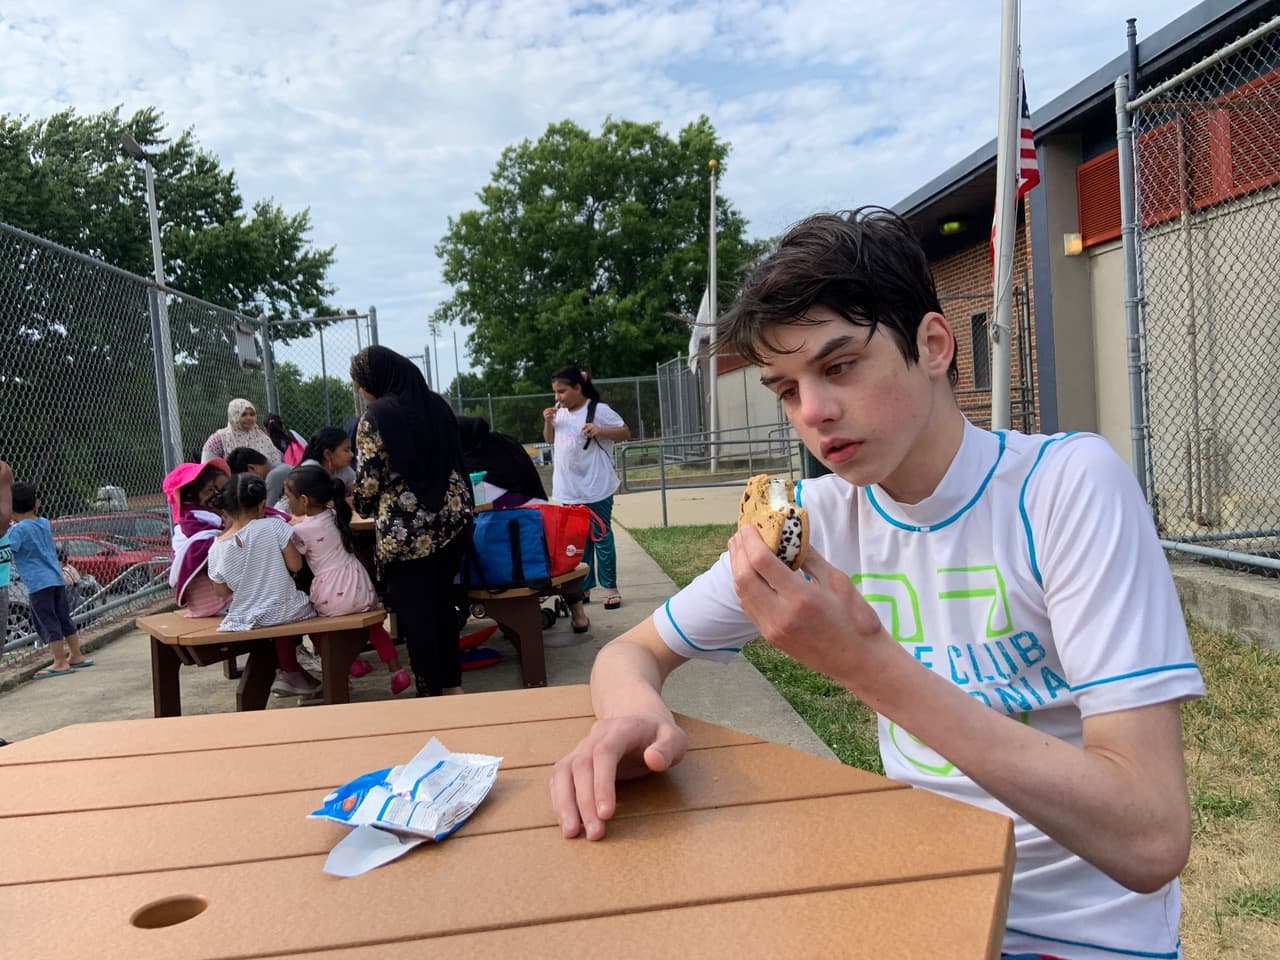 The author's son, Finn, enjoys a Chipwich (his favorite ice cream truck treat) at Dilboy Pool in Somerville, Mass. (Courtesy Alysia Abbott)